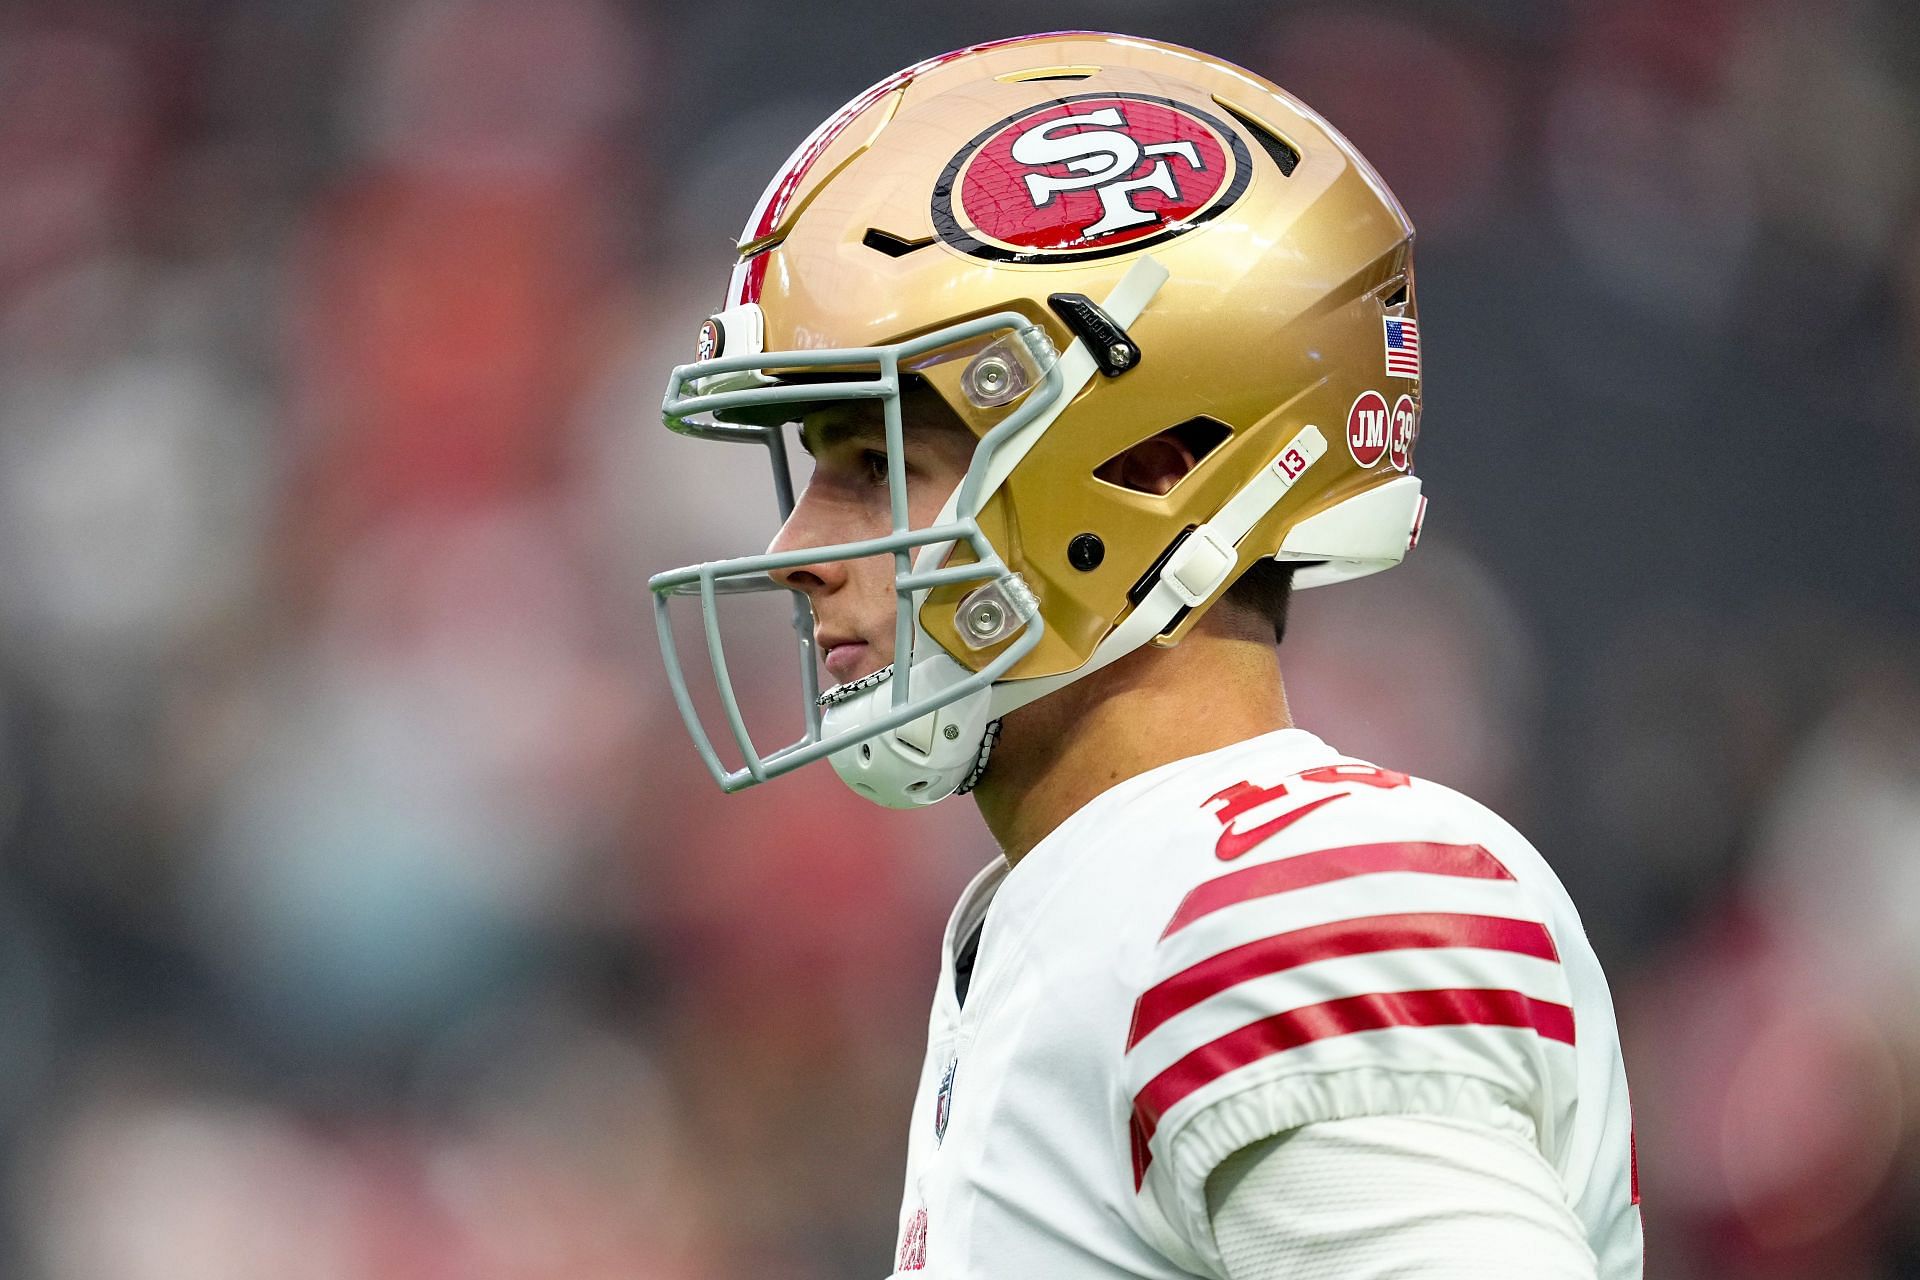 Can the 49ers win the NFC? Analyzing scenarios and San Francisco's